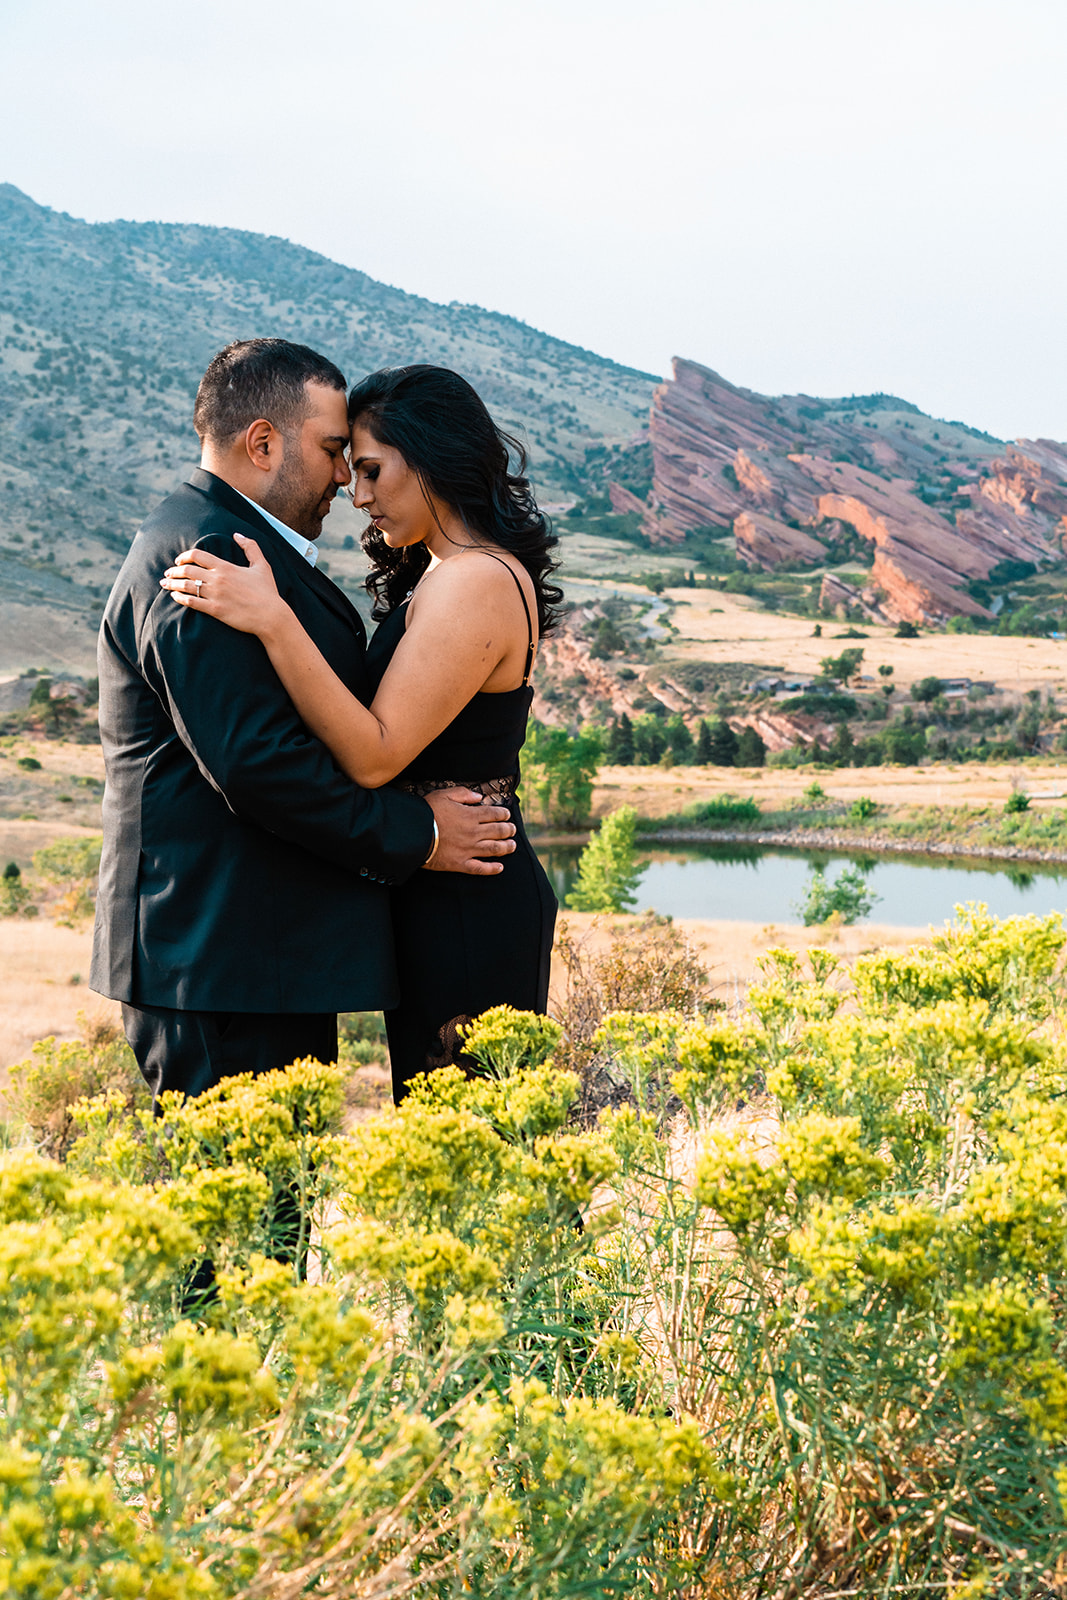 A couple embraces tenderly in a field, with a serene lake and distinctive red rock formations in the background, as featured in the Denver Elopement Guide.